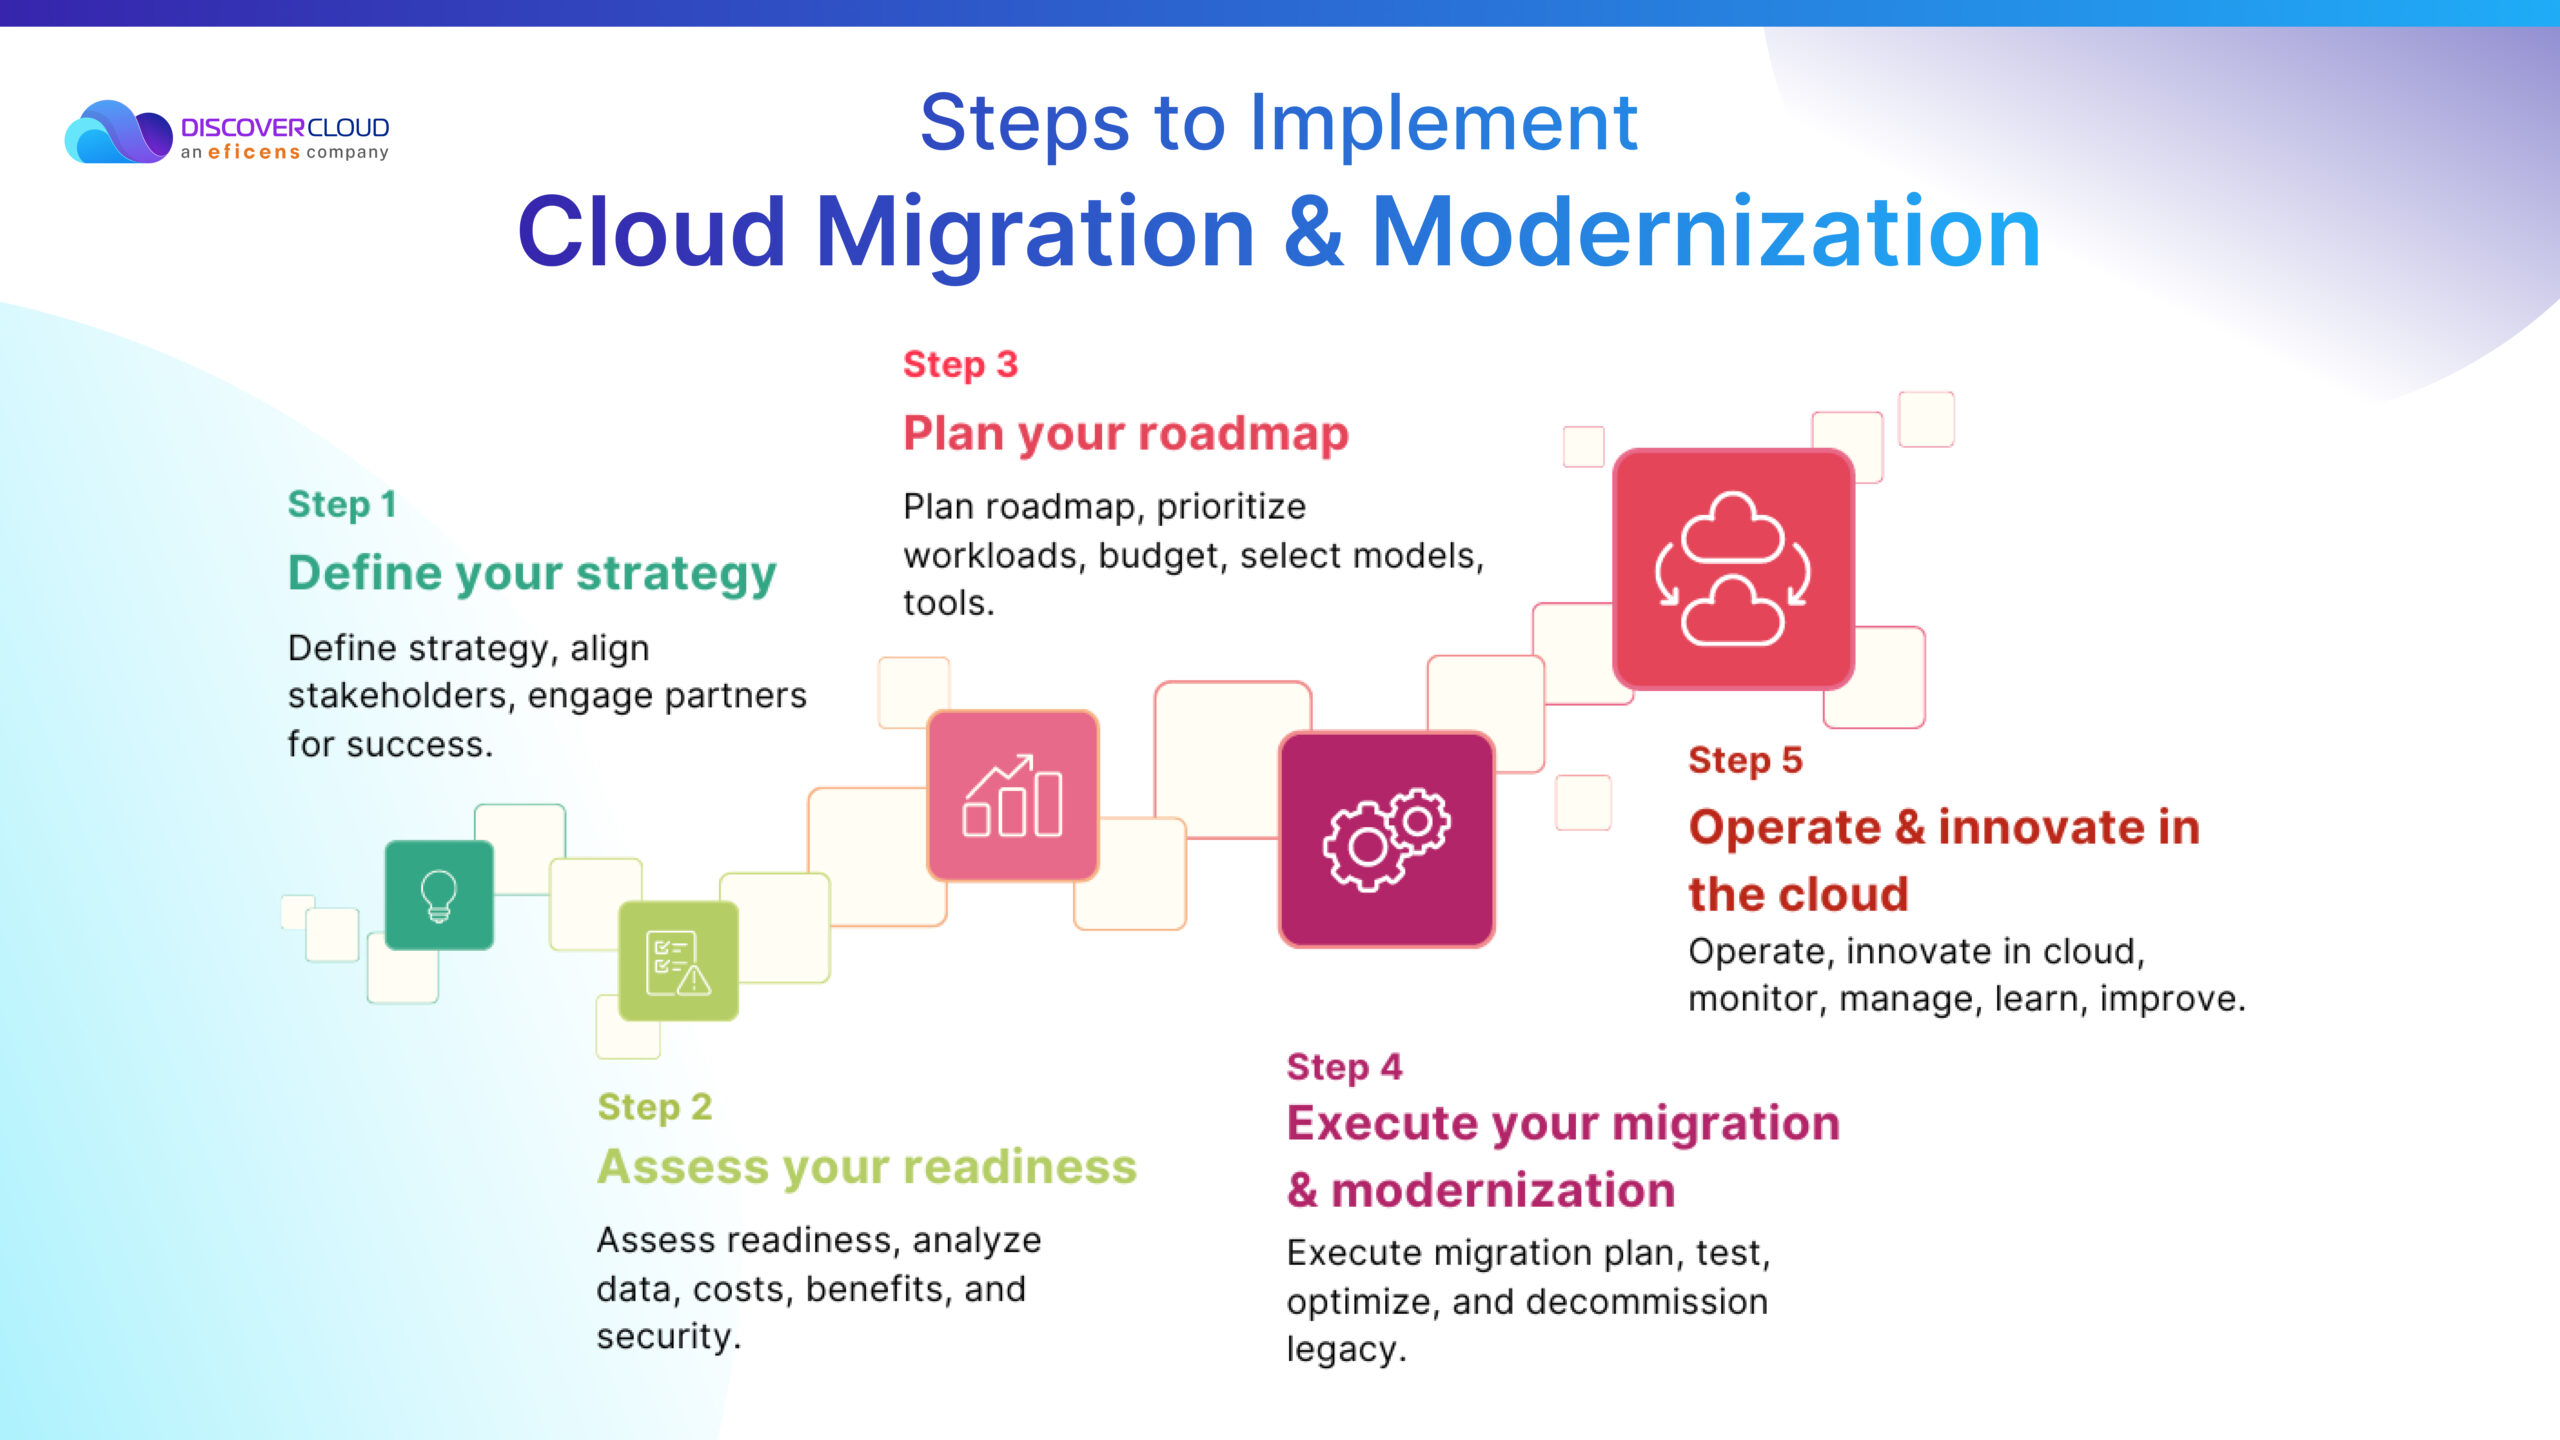 Steps to implement in Cloud Migration and Modernization